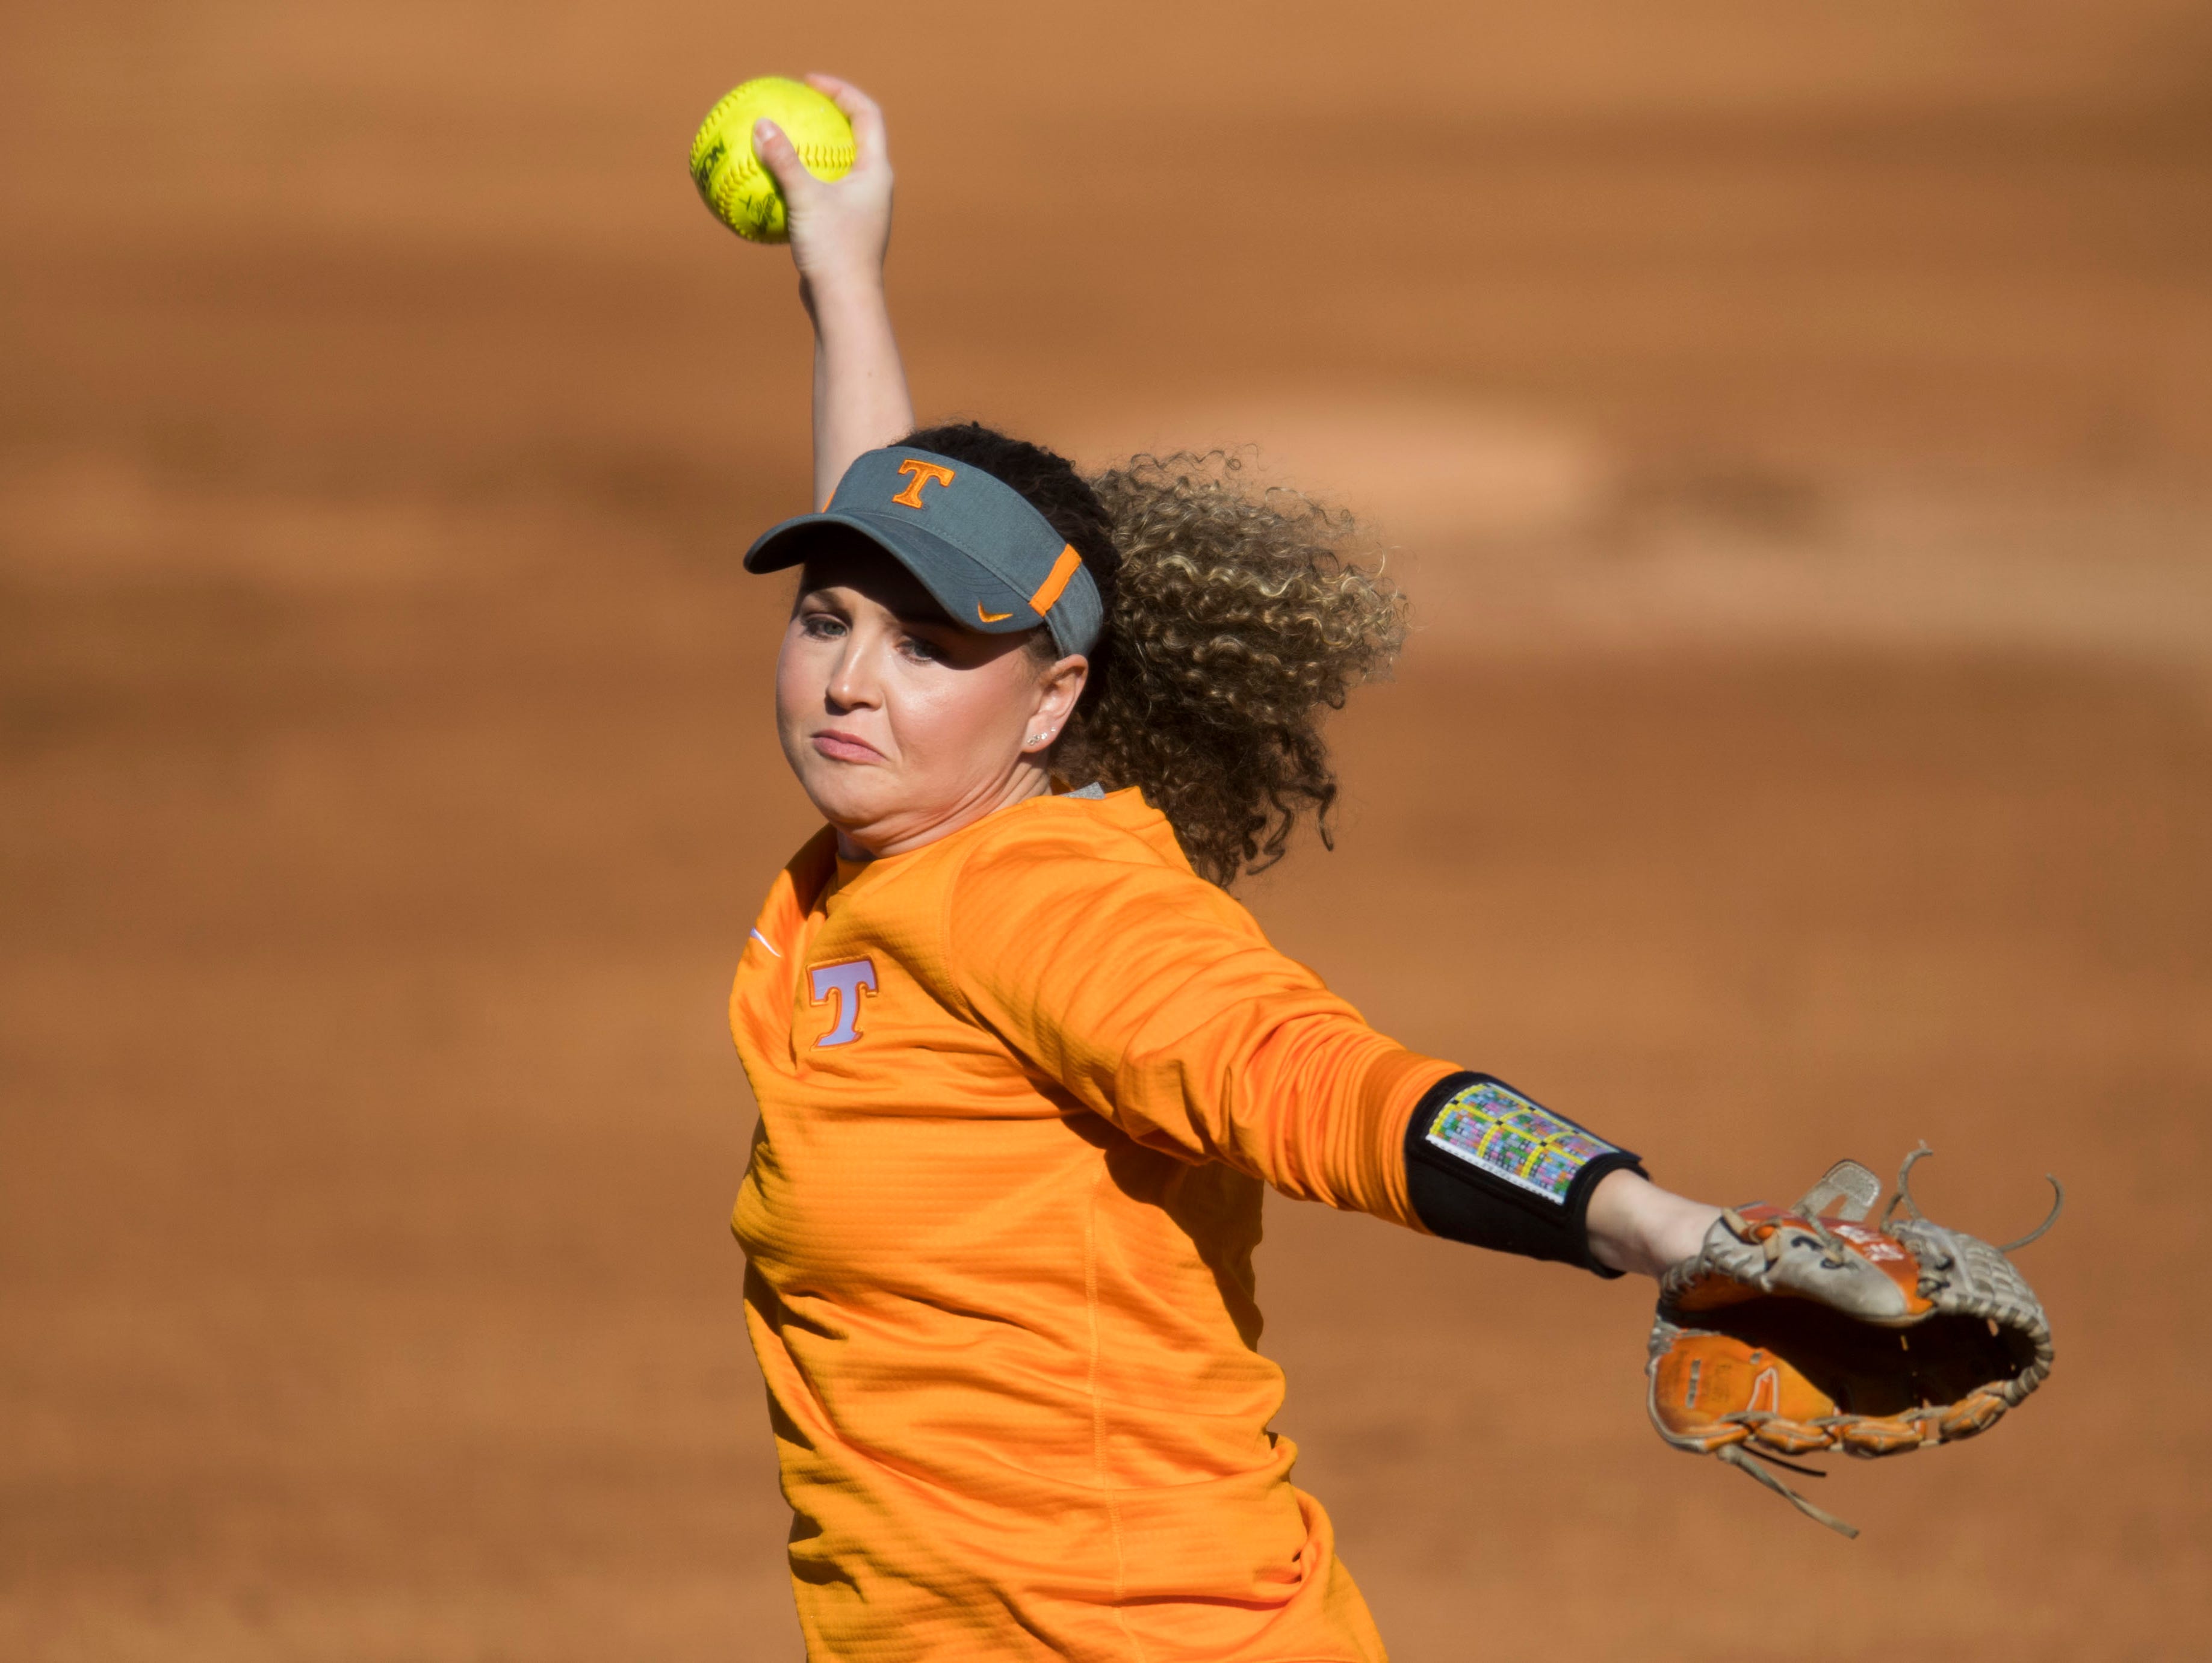 Pitchers had tears, but finished with wins to push Lady Vols to 161